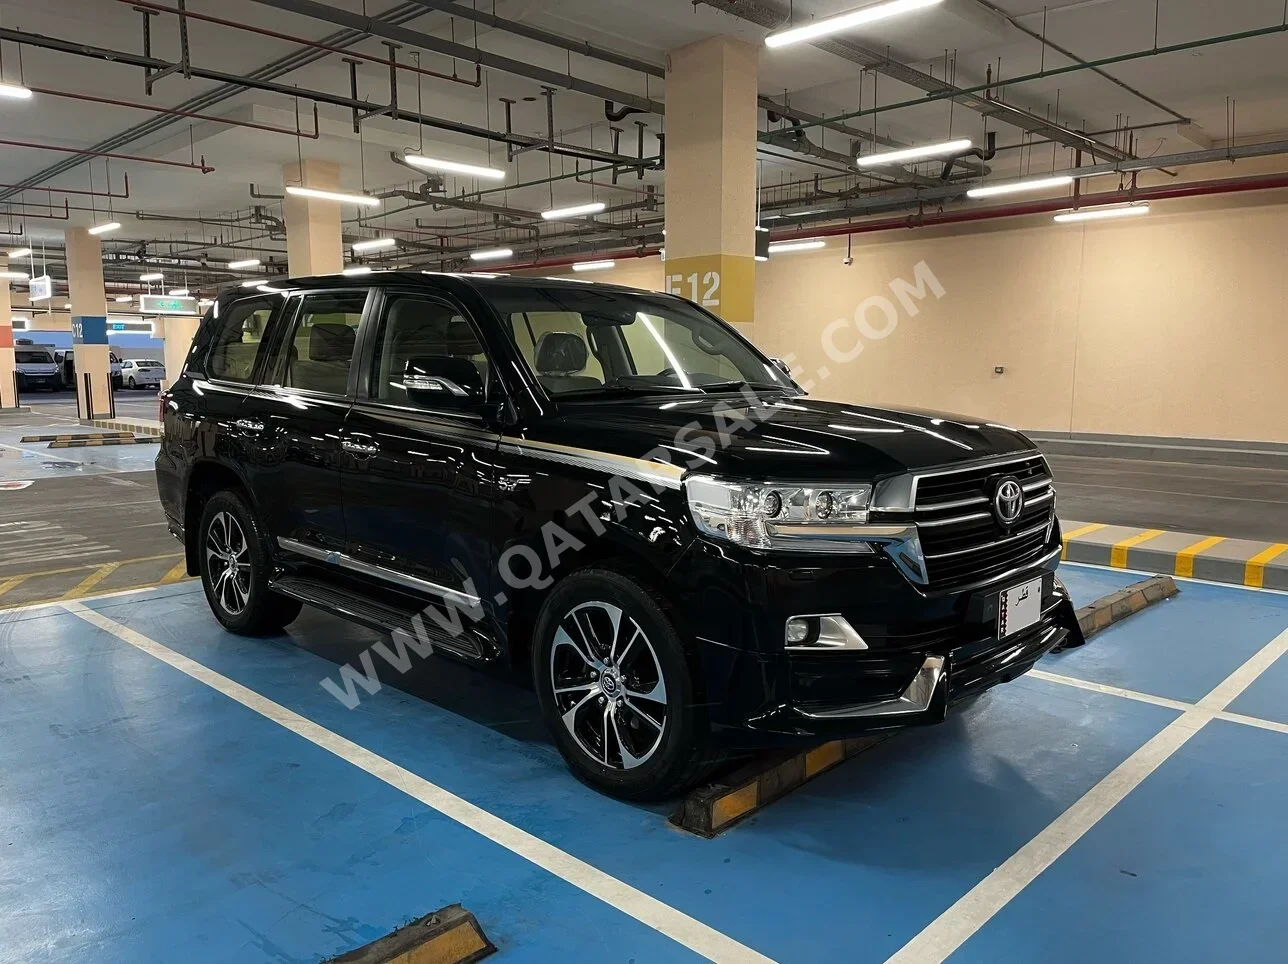 Toyota  Land Cruiser  VXR- Grand Touring S  2020  Automatic  118,000 Km  8 Cylinder  Four Wheel Drive (4WD)  SUV  Black